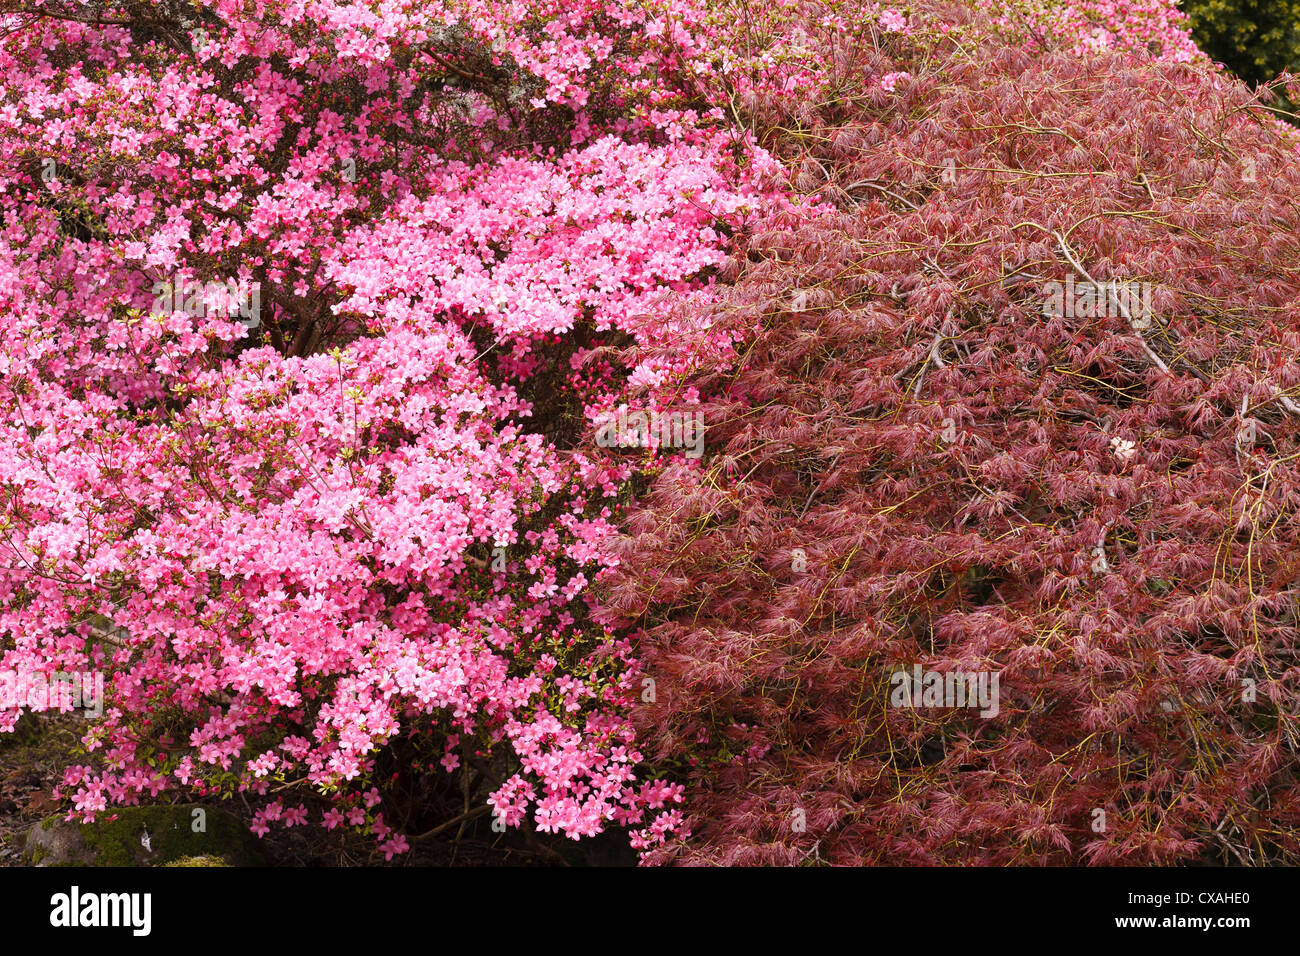 Japanese Maple (Acer japonicum) and a flowering Hybrid Azalea (Rhododendron sp.). Powys, Wales. Stock Photo